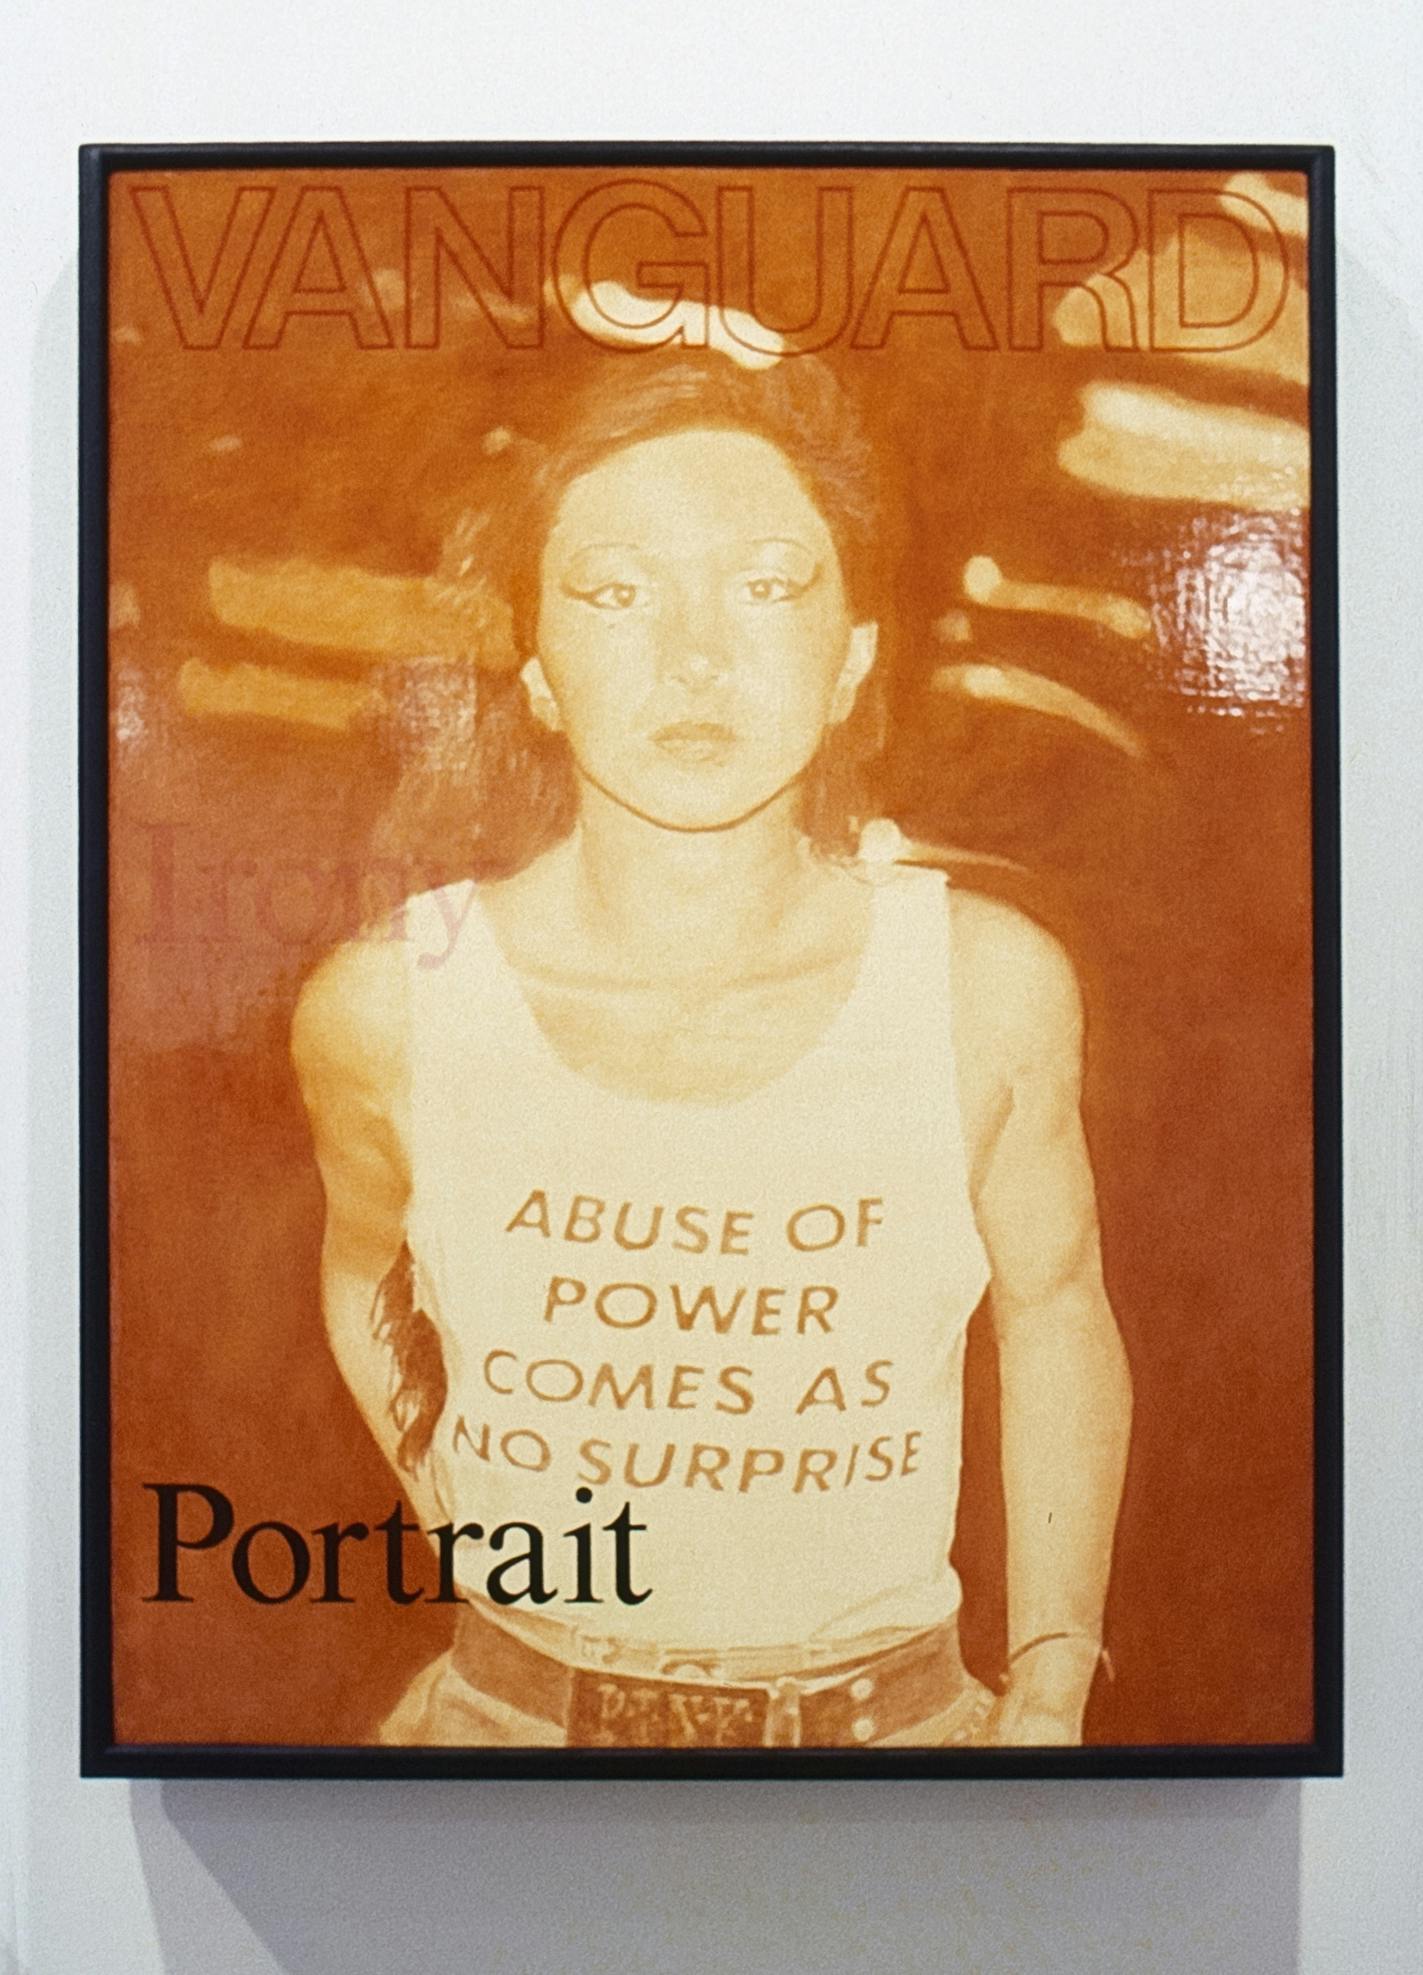 A sepia toned painted portrait of a figure wearing a shirt containing text that reads “ABUSE OF POWER COMES AS NO SURPRISE.”